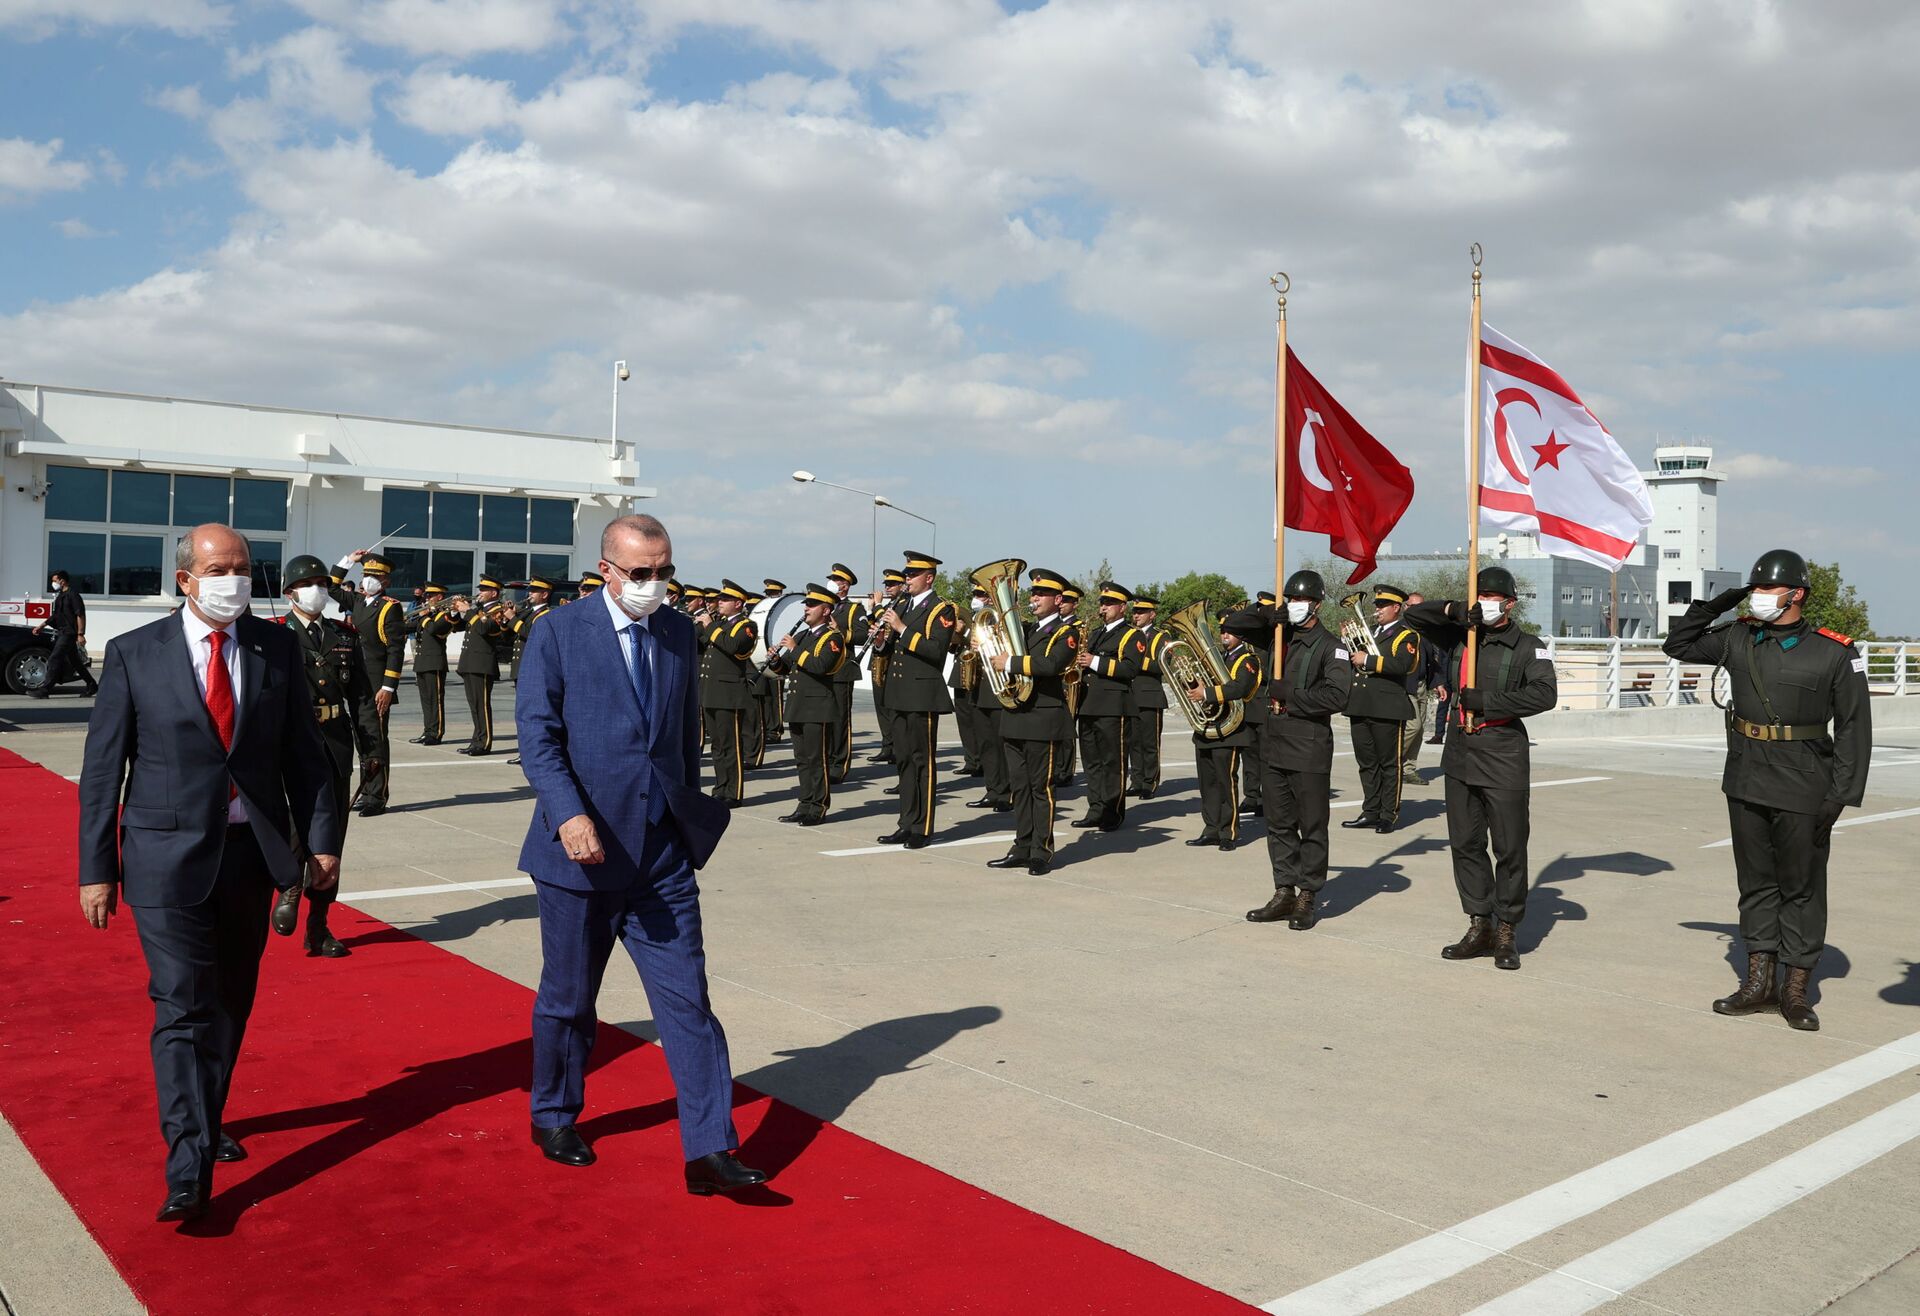 Turkish President Tayyip Erdogan reviews a guard of honour with Turkish Cypriot leader Ersin Tatar before he daparts from the Turkish Republic of Northern Cyprus, a breakway state recognized only by Turkey, in northern Nicosia, Cyprus July 20, 2021. - Sputnik International, 1920, 07.09.2021